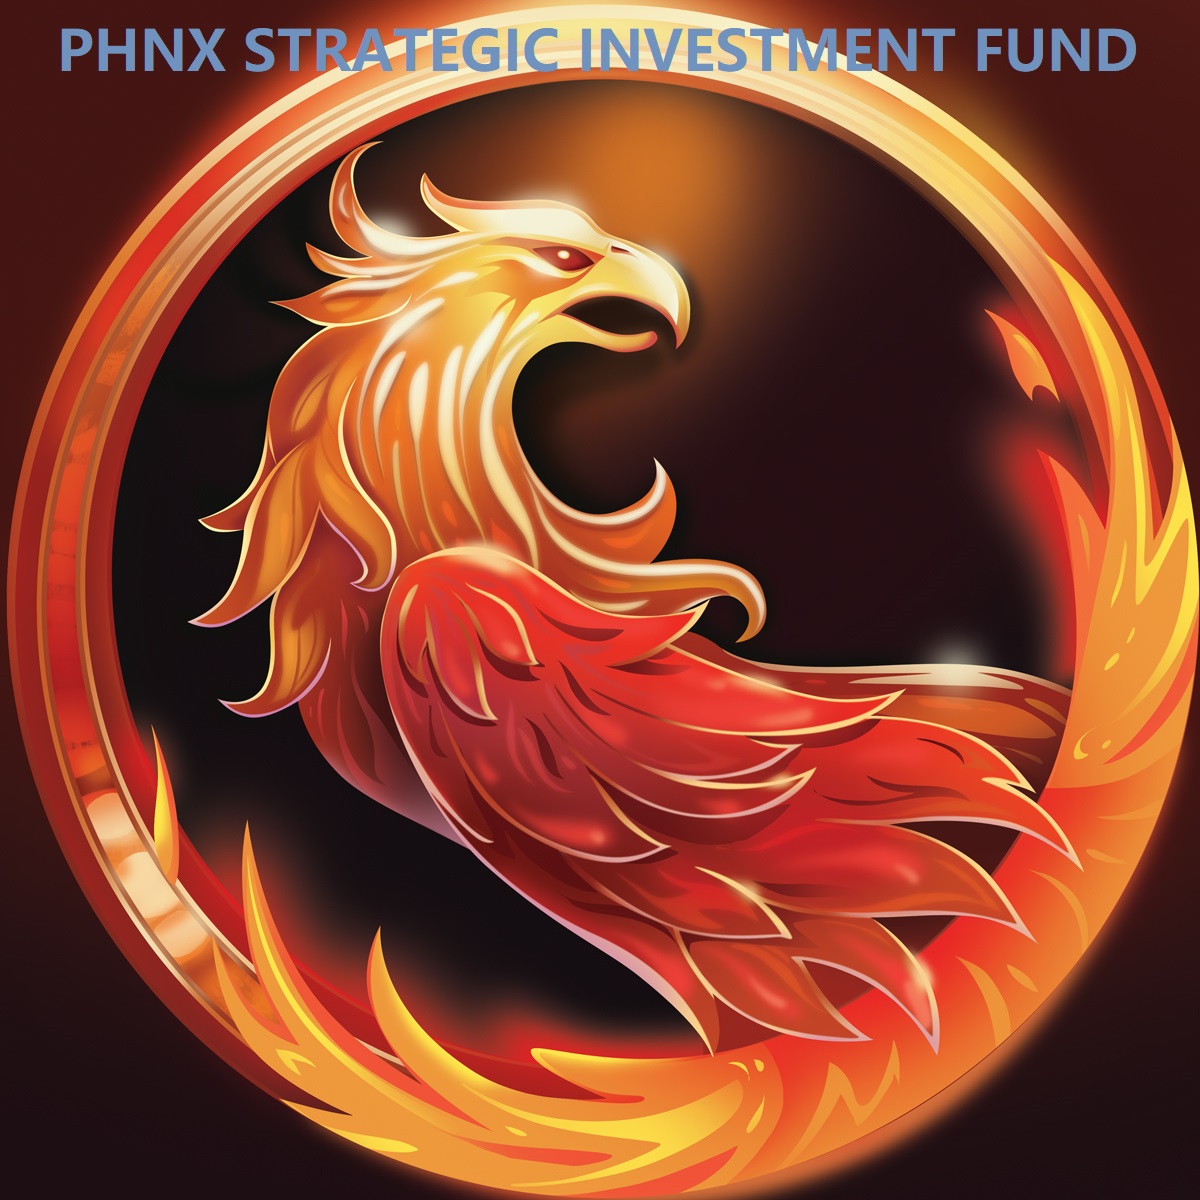 Yesterday we made the first $XRD deposit into the PHNX STRATEGIC INVESTMENT FUND. To learn more about this one-of-a-kind fund, read the announcement post in the $PHNX Telegram group: t.me/phoenix_xrd